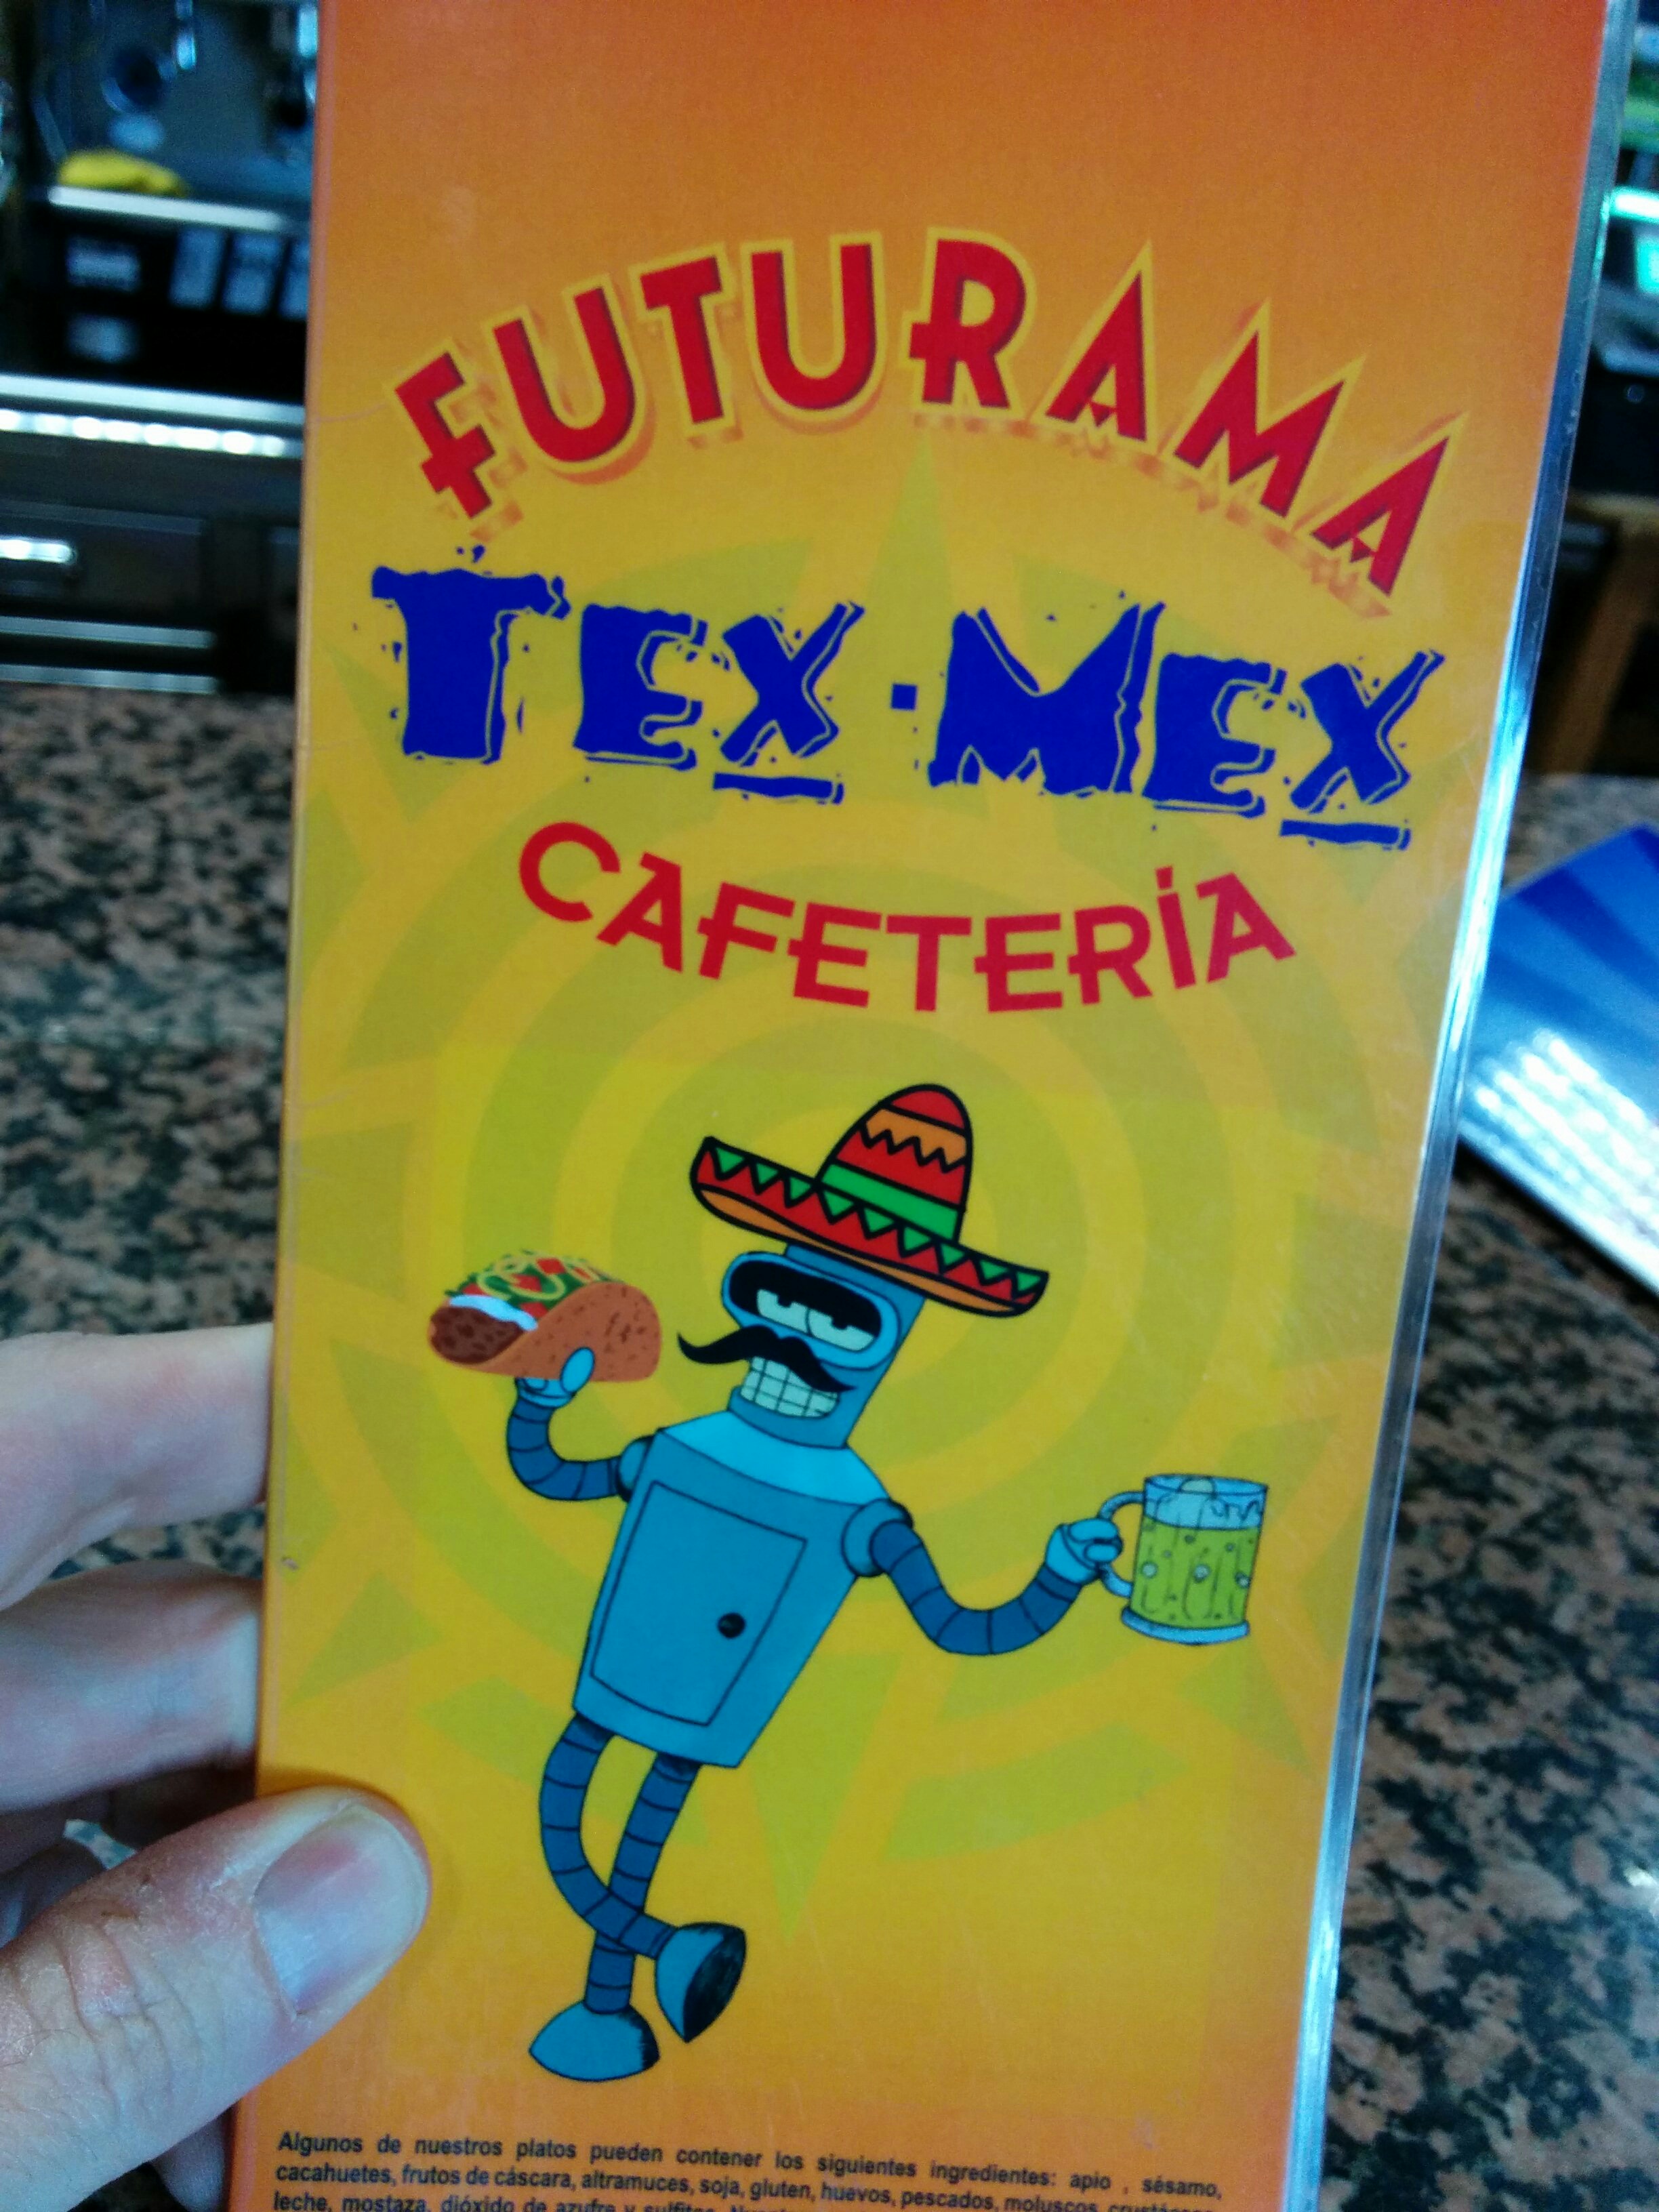 Besides the regular menu, they've got a separate Tex-Mex menu with burritos and stuff.